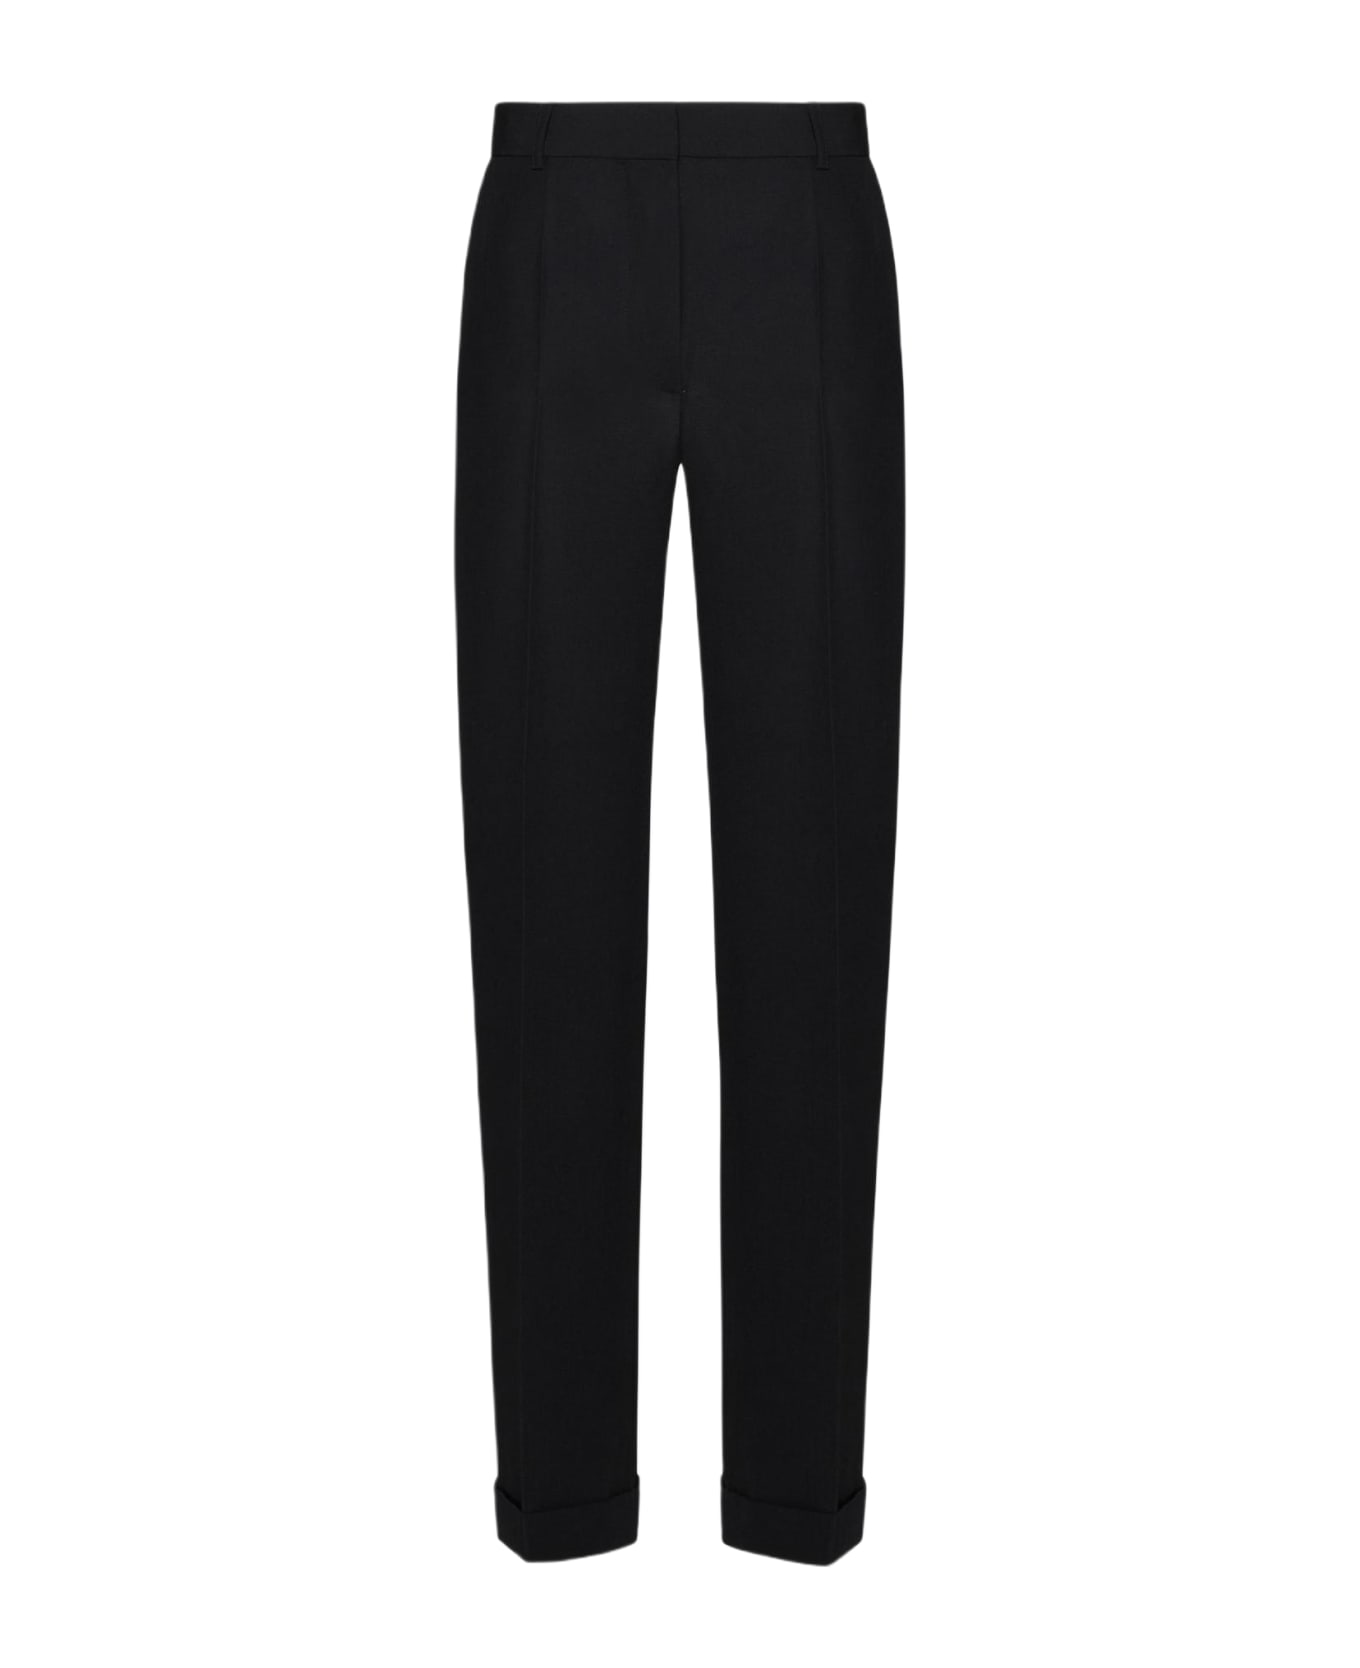 Totême Wool-blend Tailored Trousers - Black ボトムス